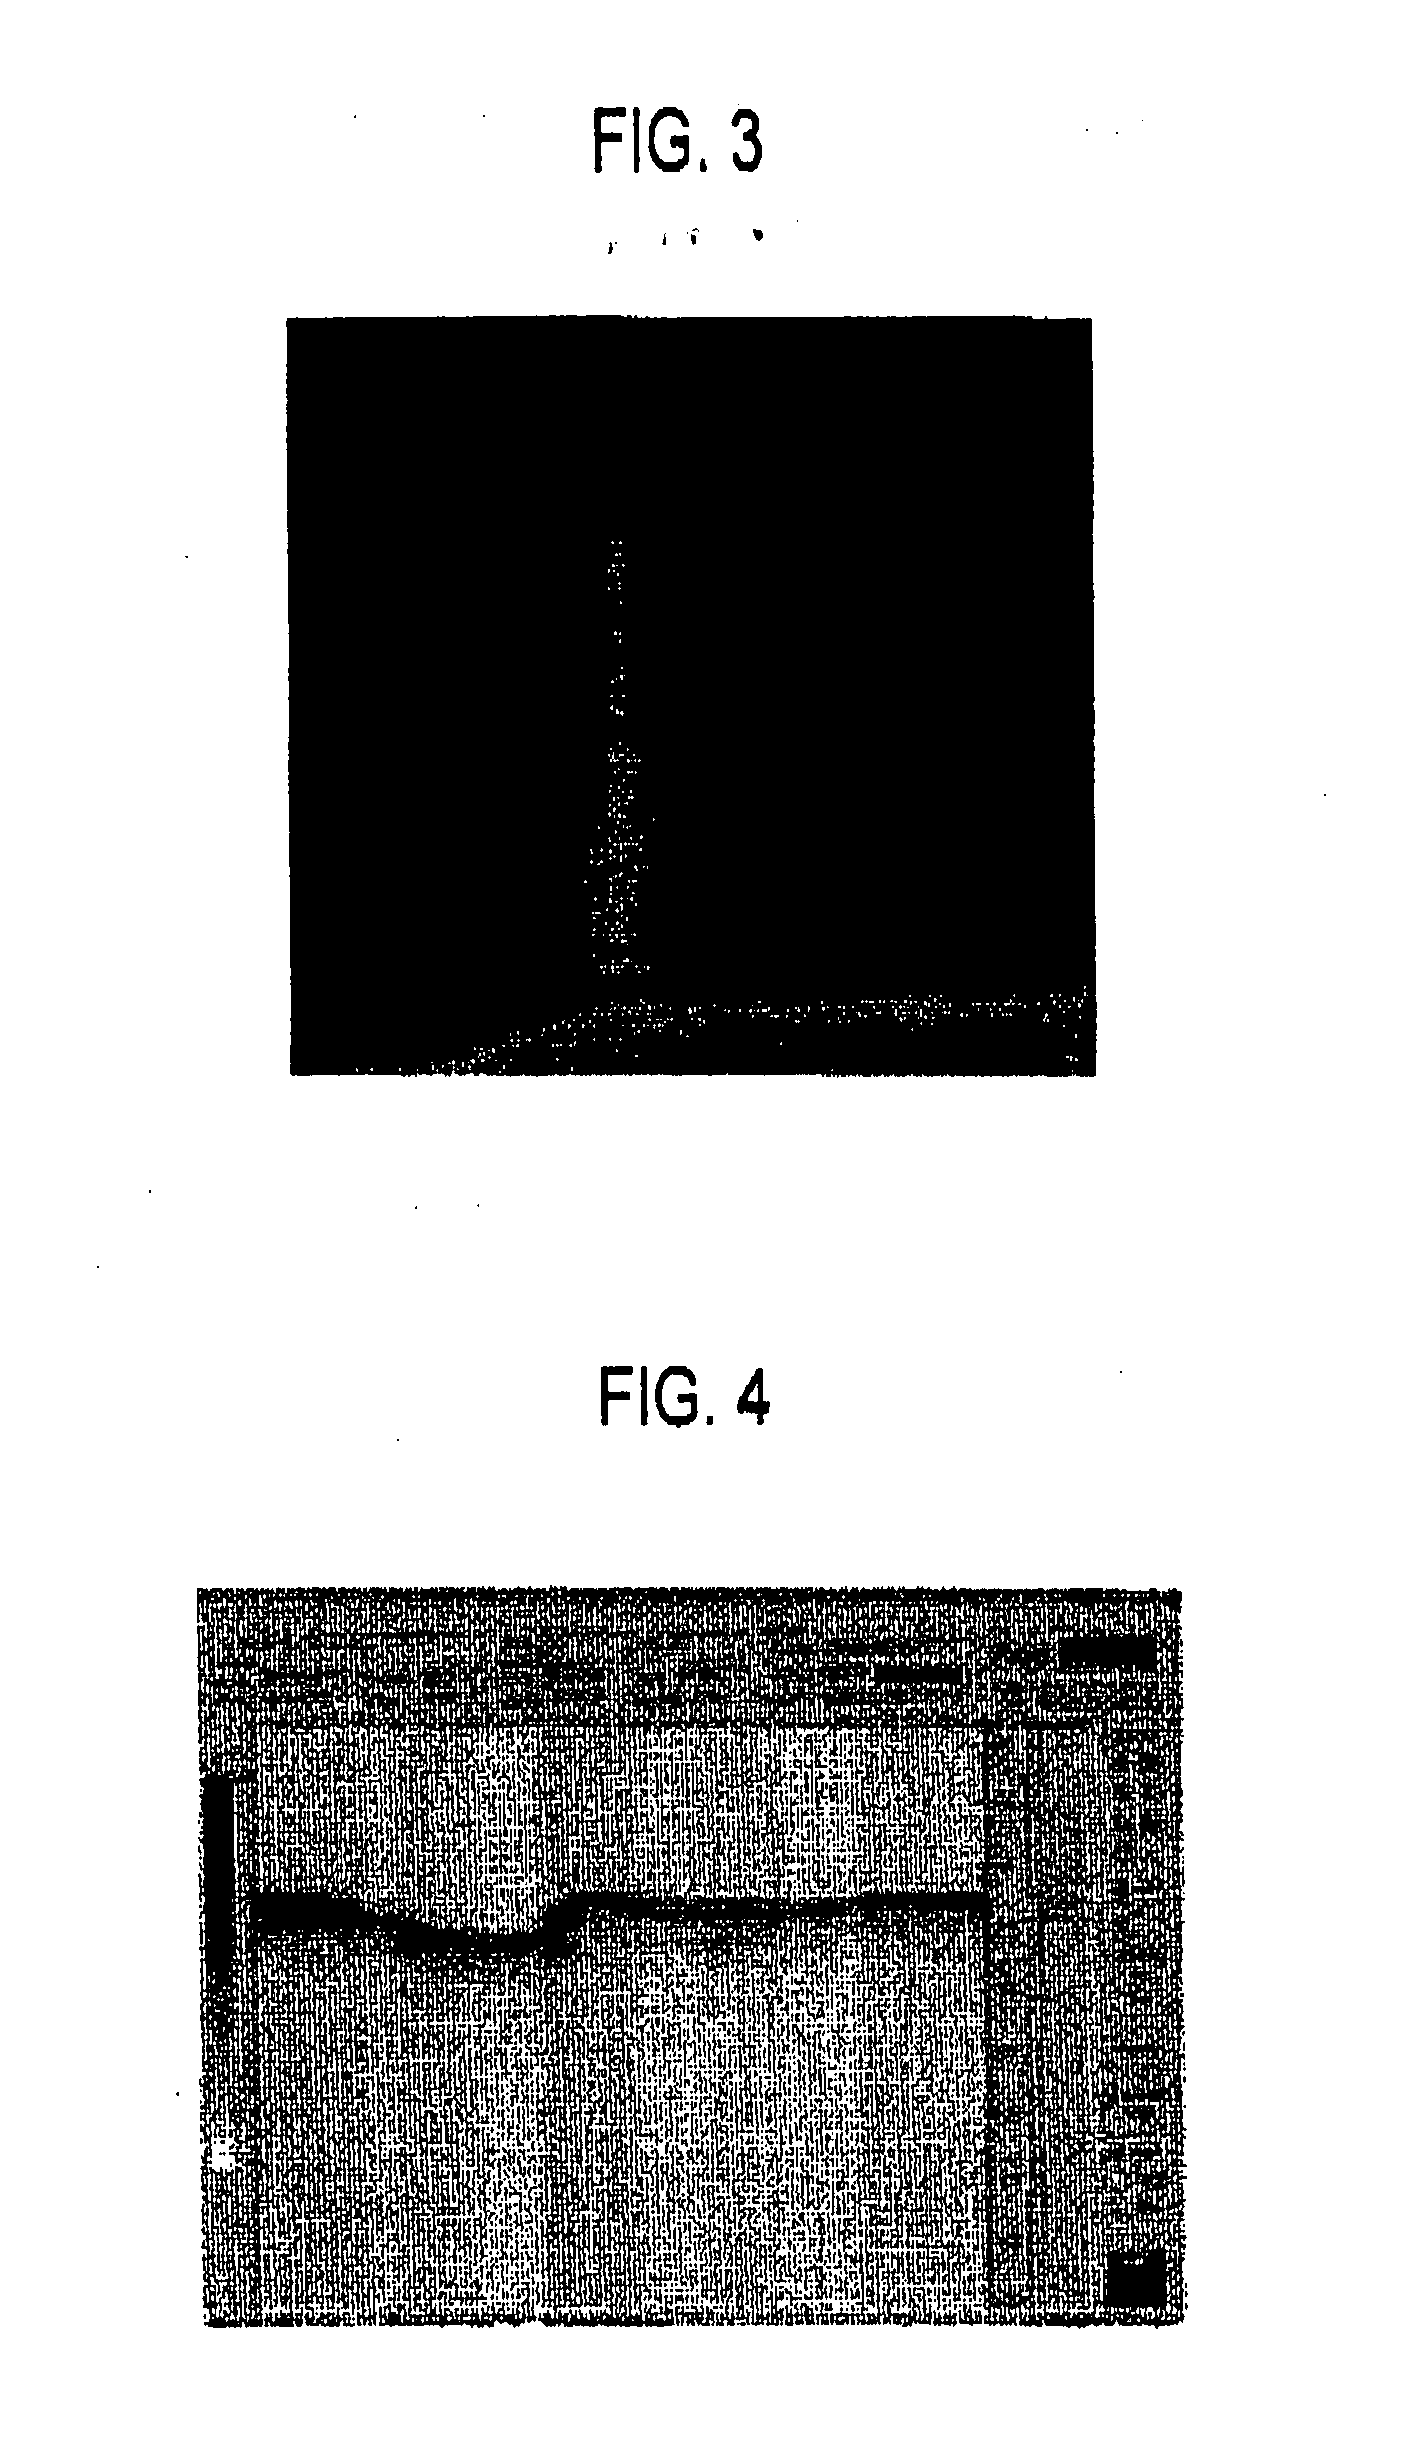 Seabed Resource Exploration System and Seabed Resource Exploration Method